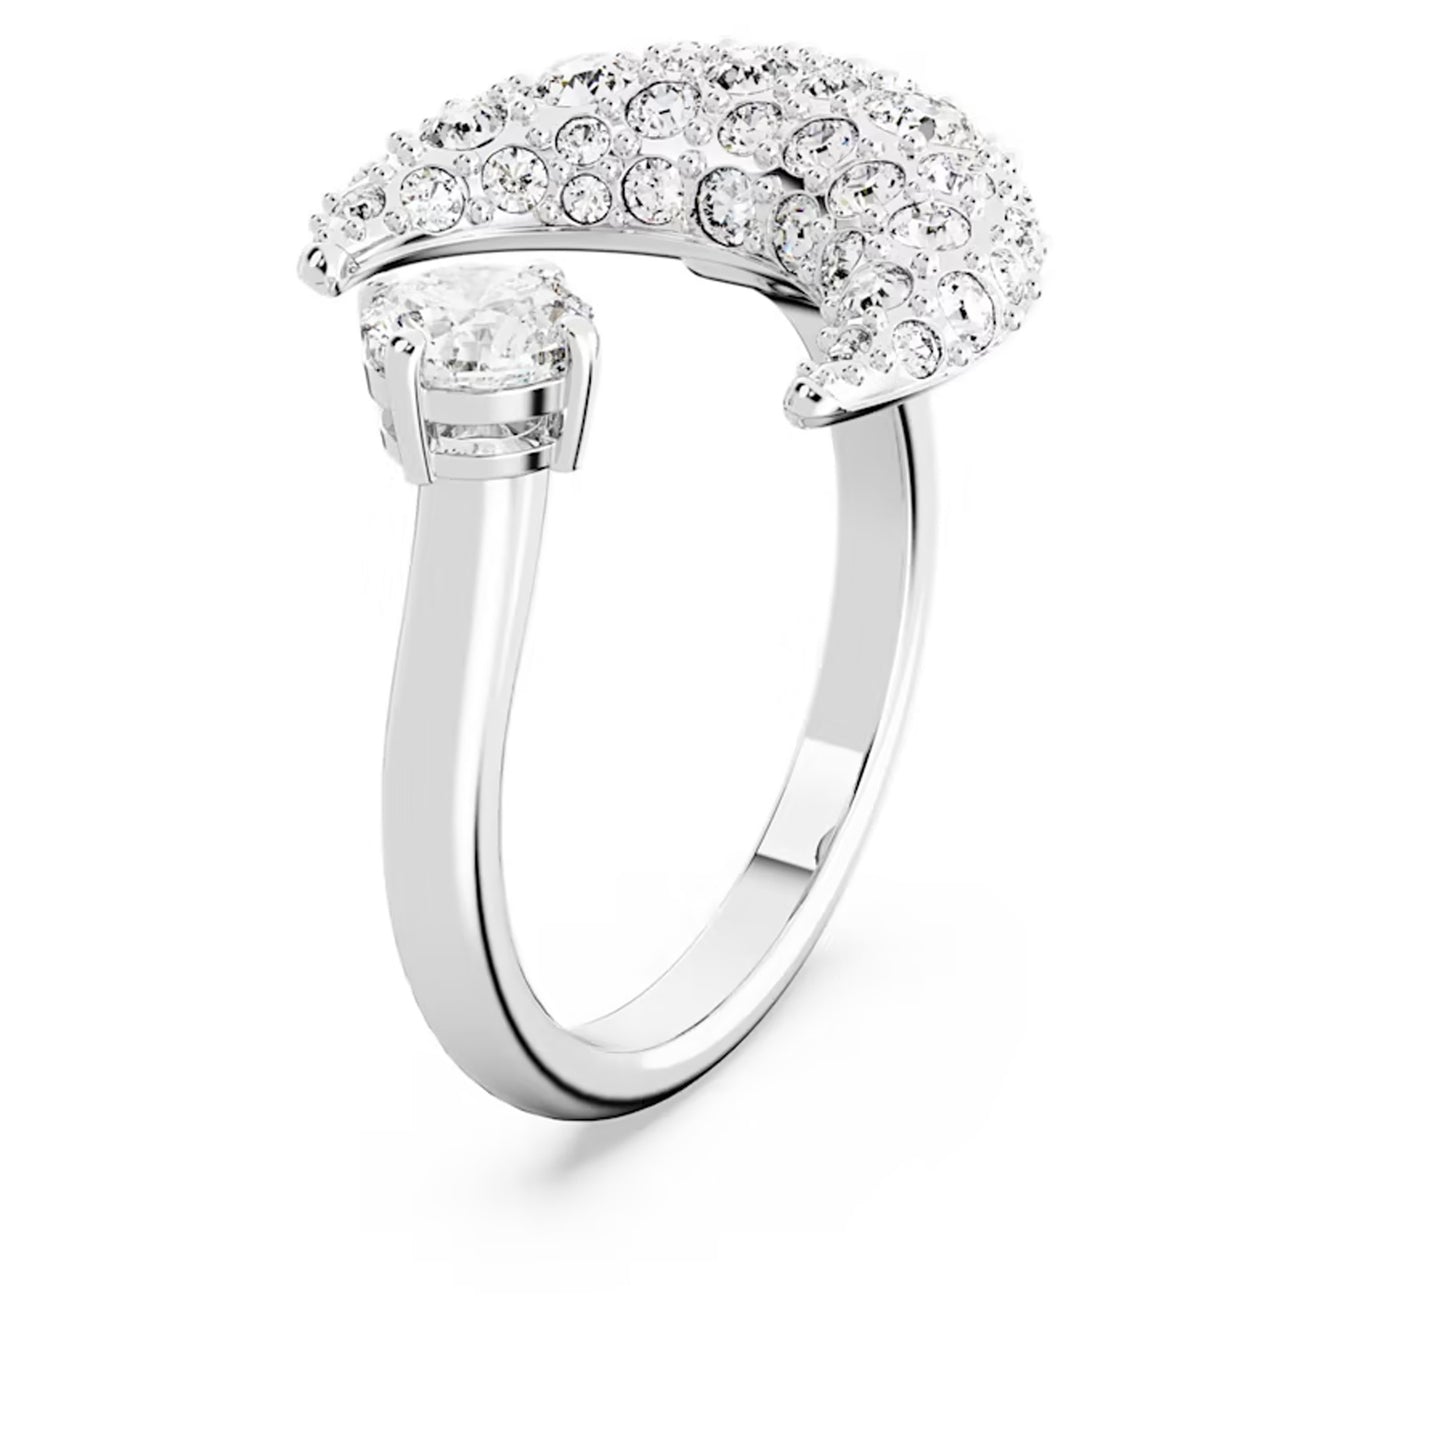 Luna open ring Size 52